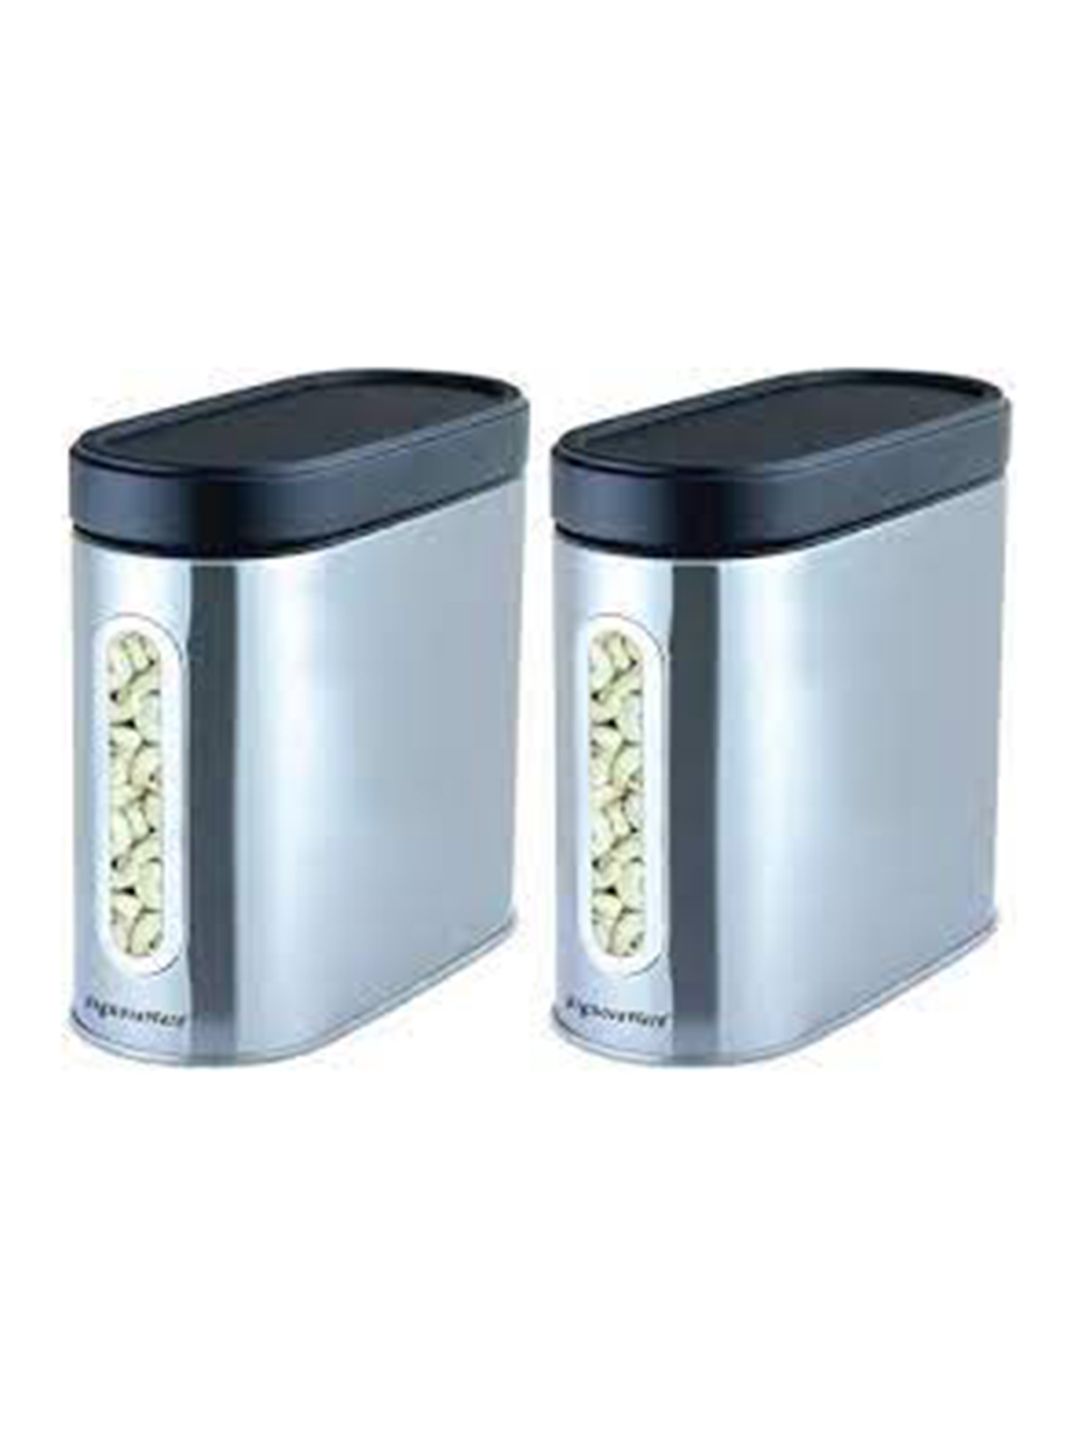 SignoraWare Set Of 2 Silver-Toned & Black Stainless Steel Food Storage Containers 1700ml Price in India